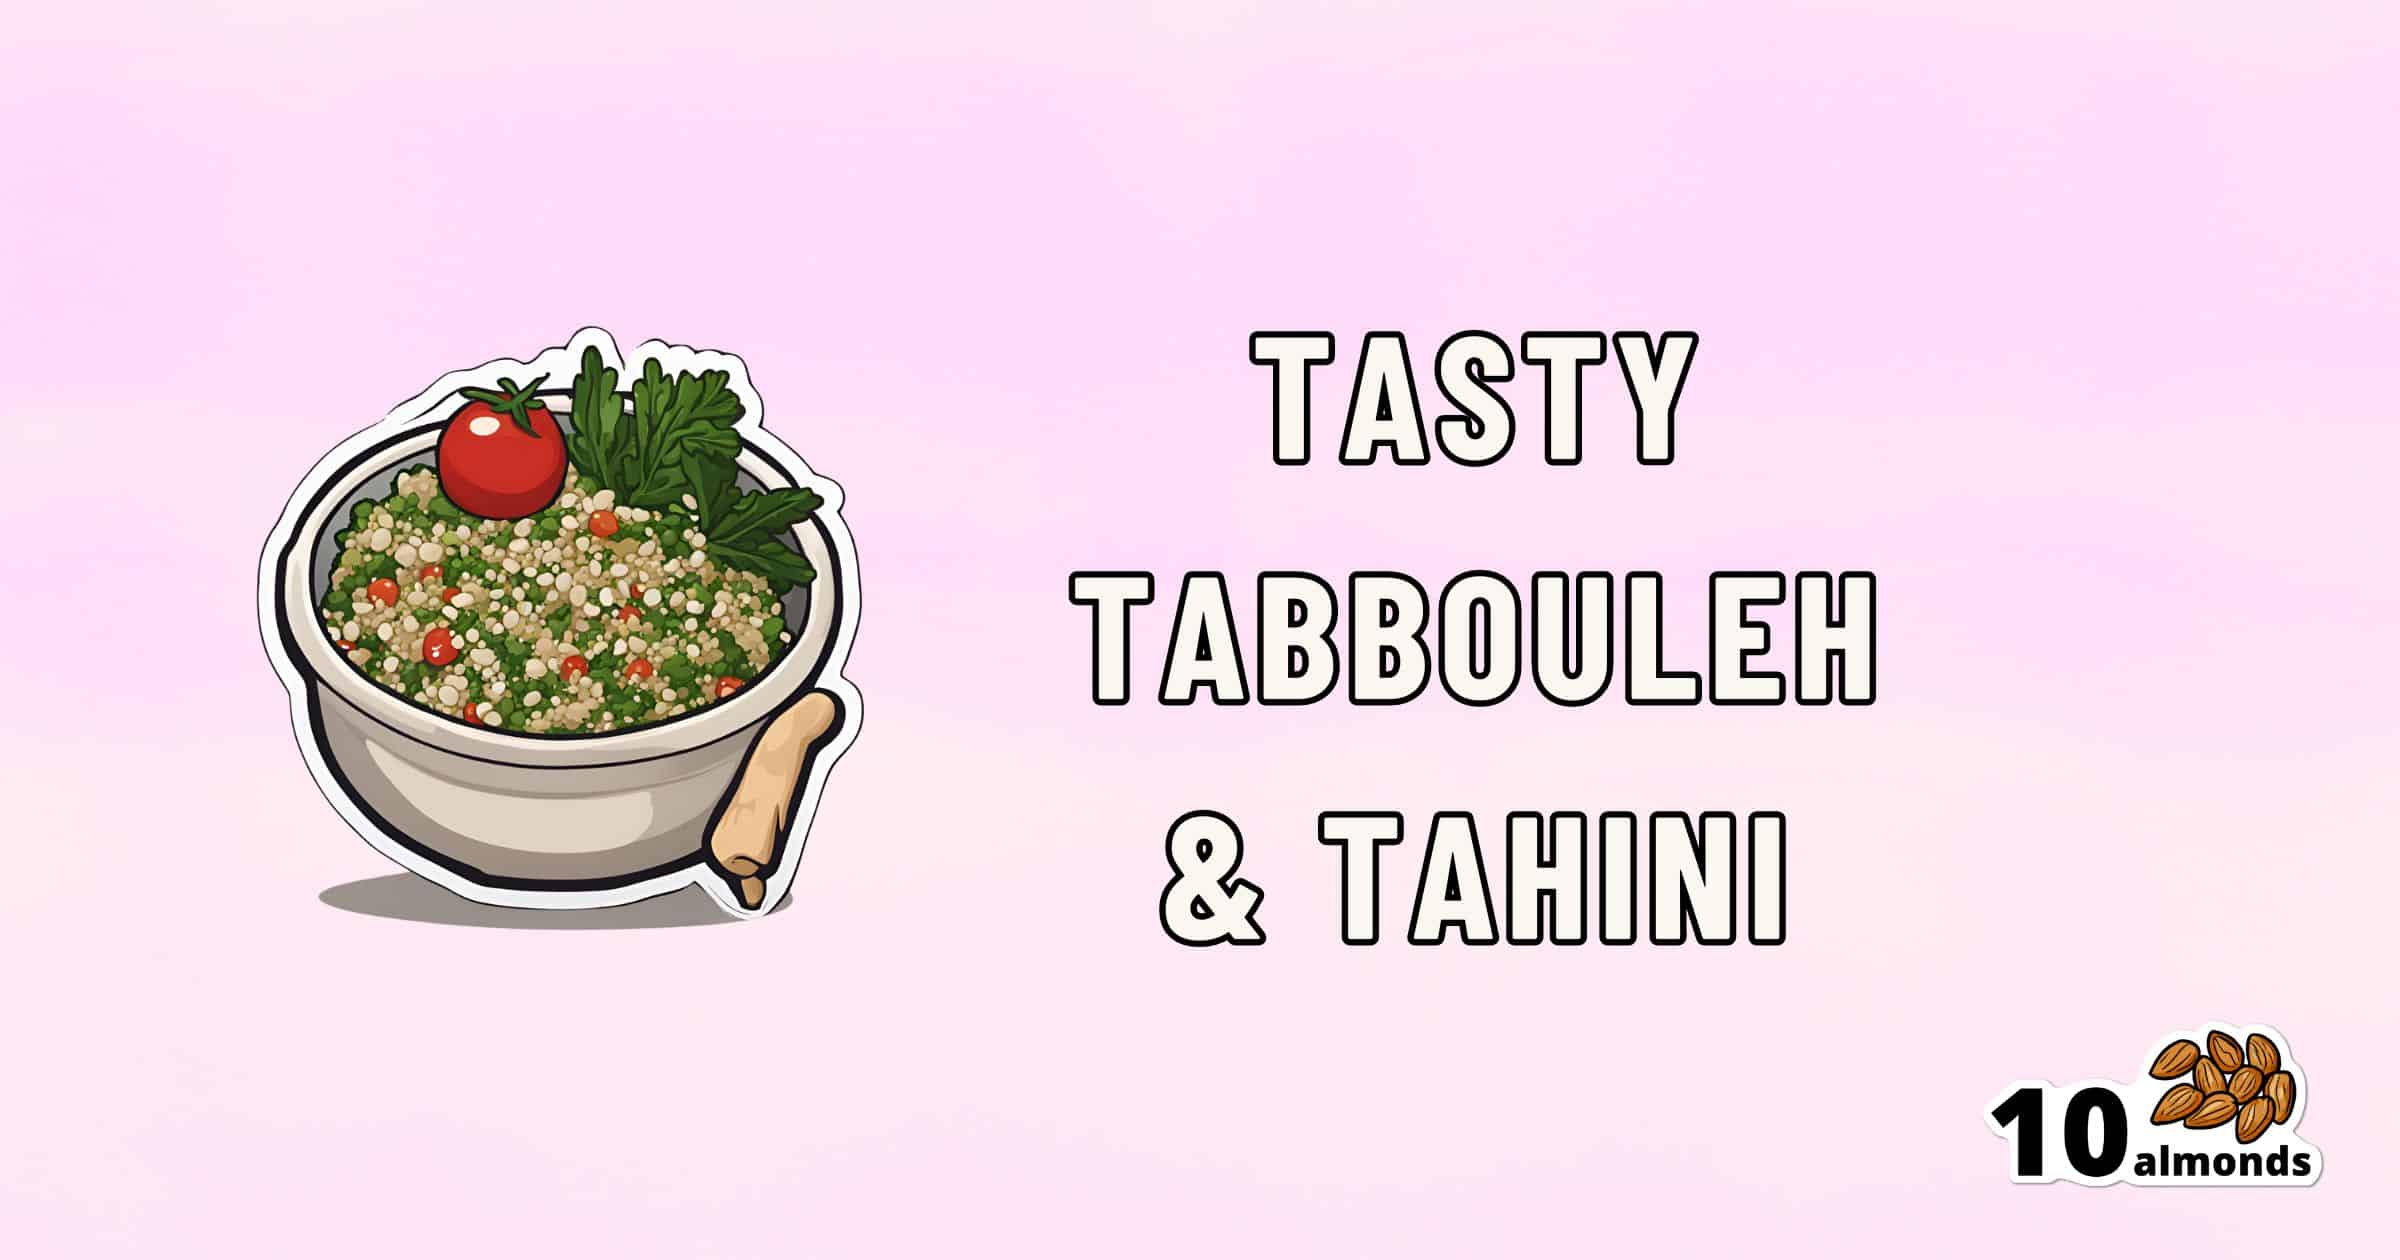 An enticing image showing a bowl of tasty tabbouleh and tahini garnished with a cherry tomato and parsley. The words "Tasty Tabbouleh & Tahini" are written beside the bowl. In the bottom right corner, there's an illustration of ten almonds.